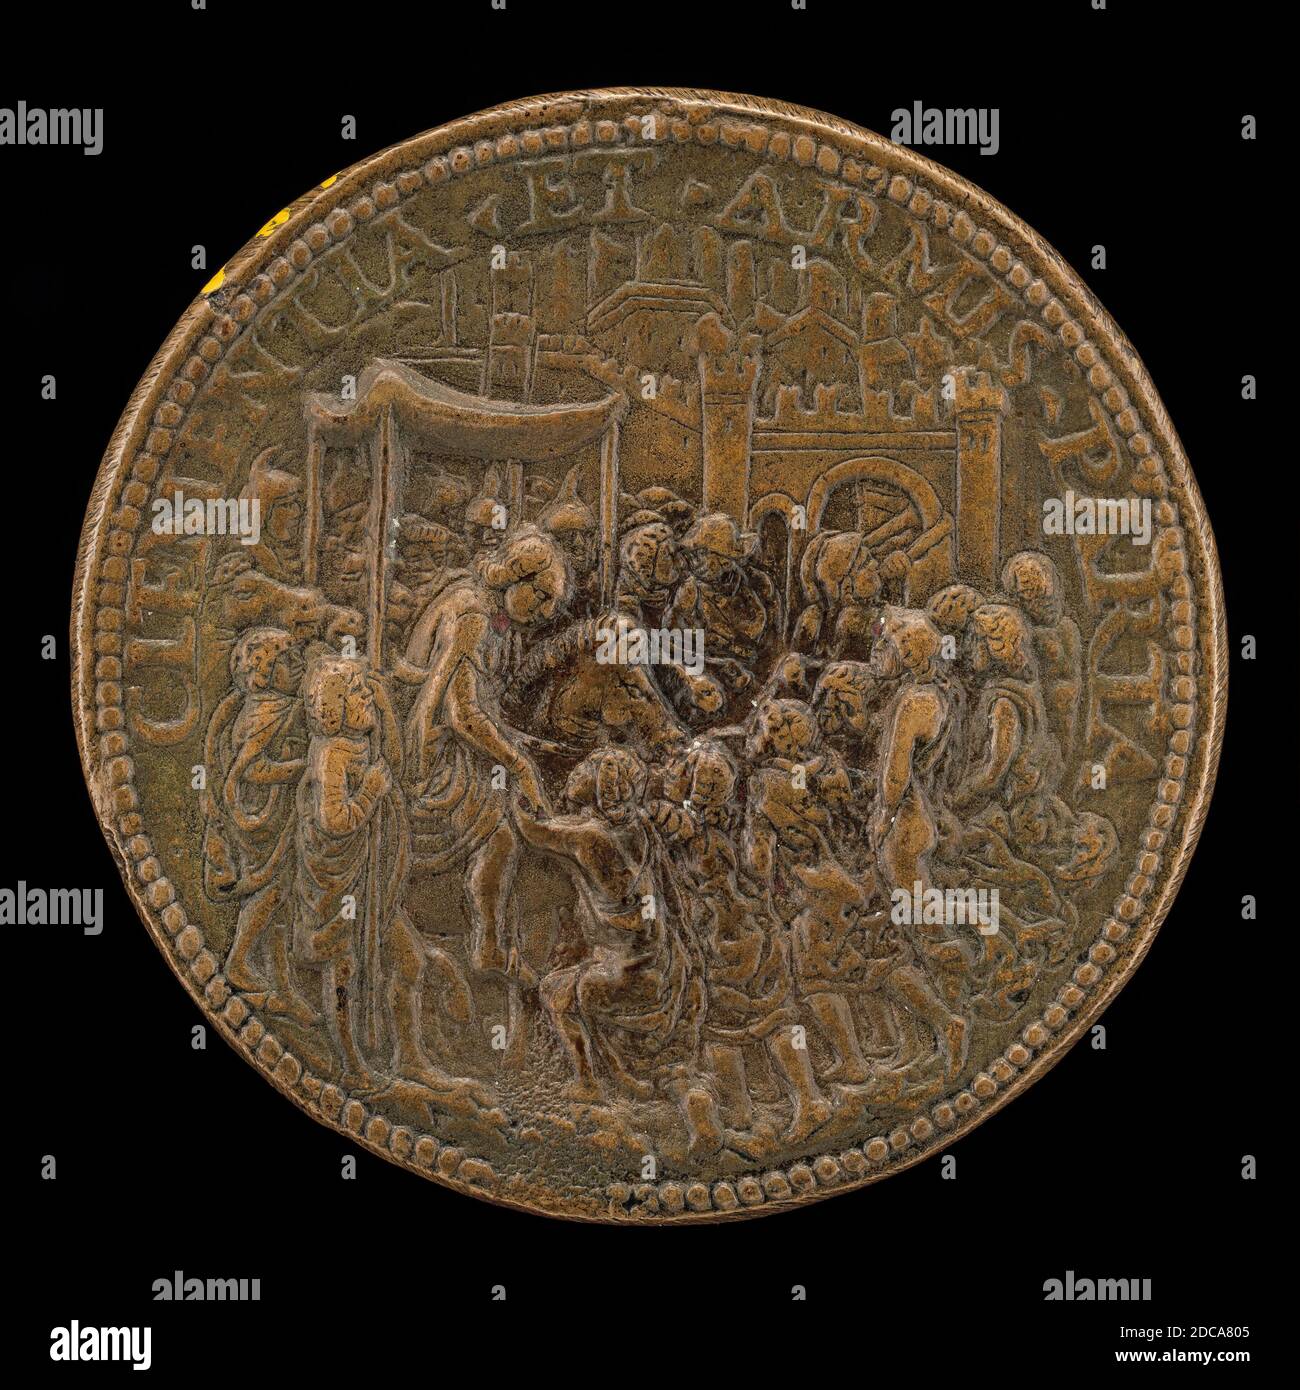 Caradosso Foppa, (artist), Milanese, c. 1452 - 1526/1527, Francesco Approaching a City, c. 1488, bronze/Late cast, overall (diameter): 4.08 cm (1 5/8 in.), gross weight: 20.16 gr (0.02 kg), axis: 6:00 Stock Photo